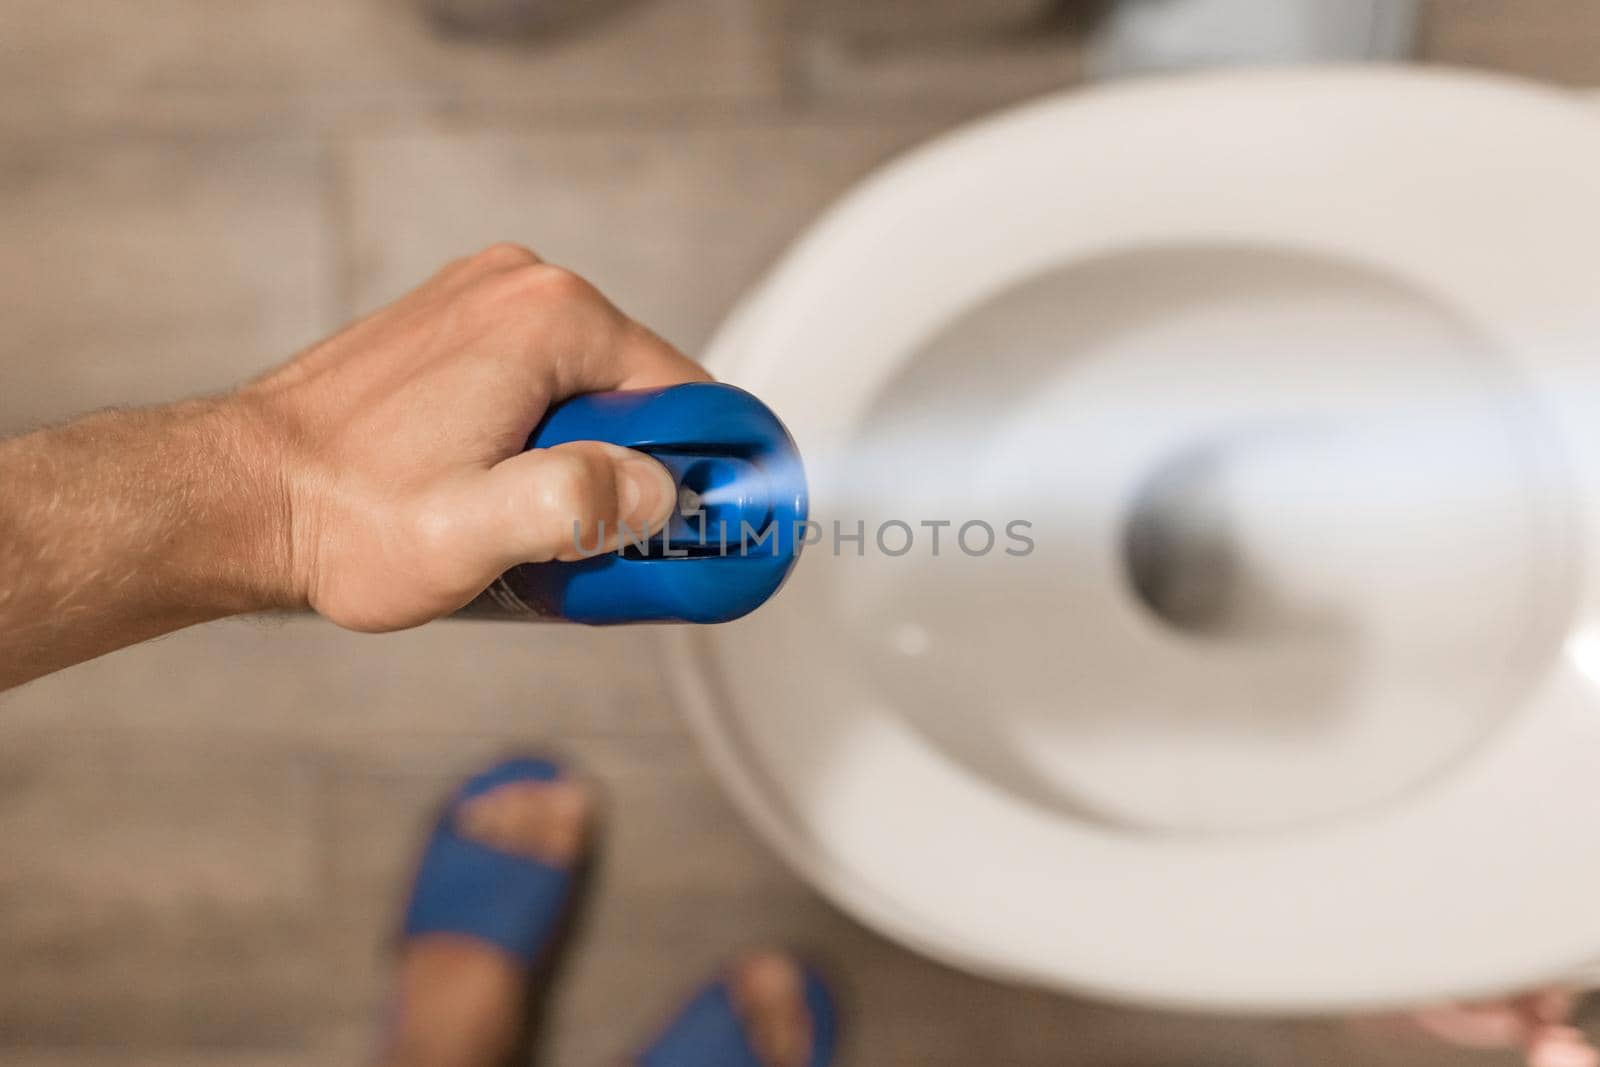 The guy's hand holds and sprays the air freshener in the toilet or bathroom. Home Hygiene Concept.